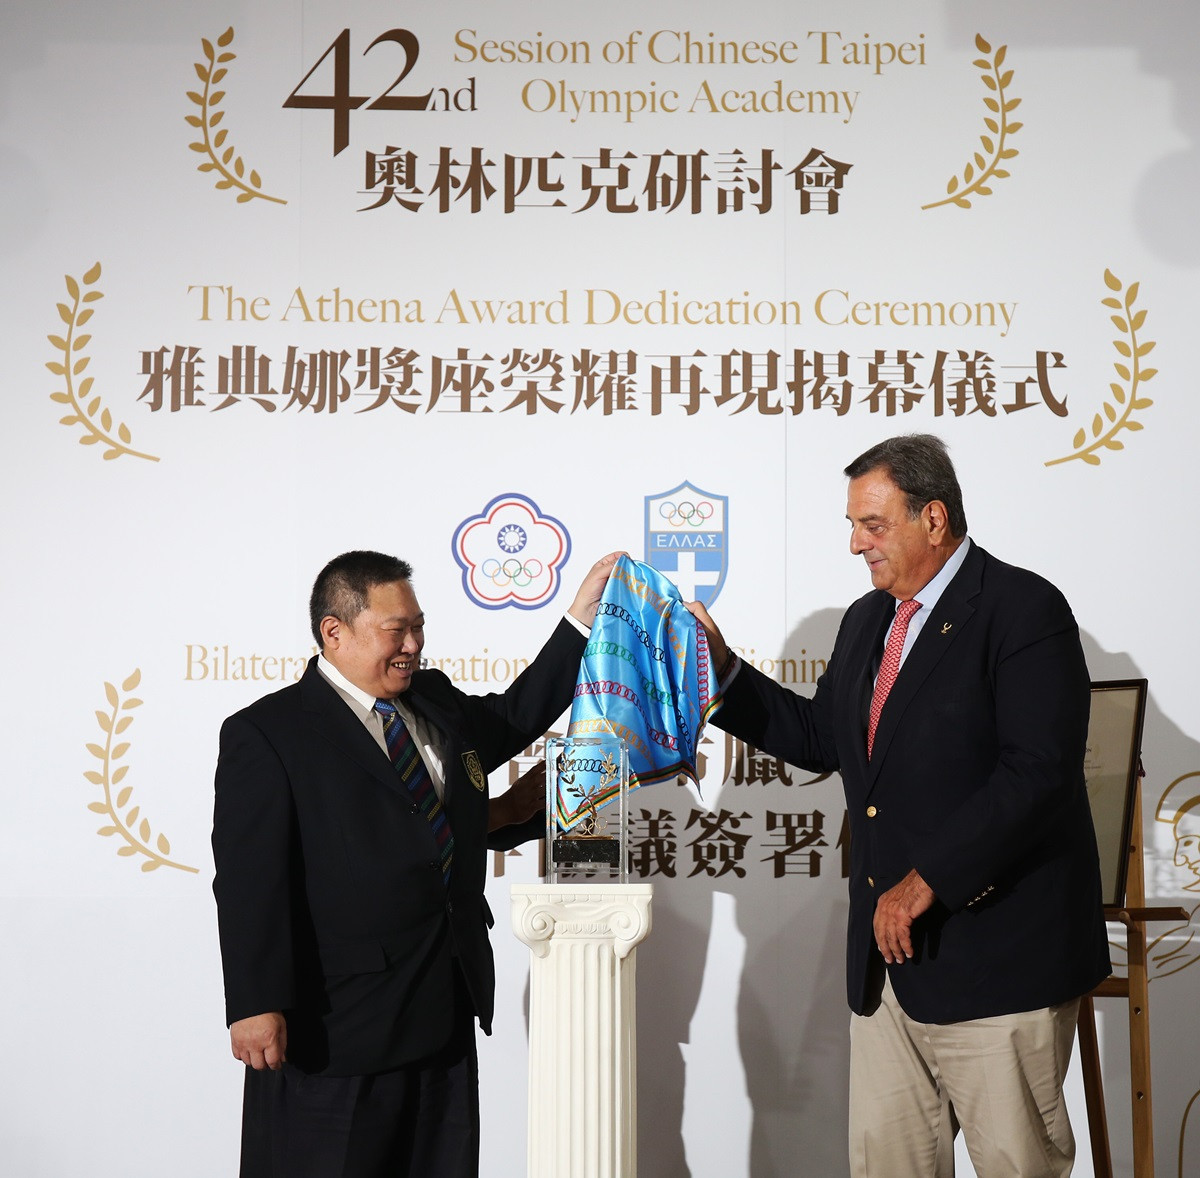 The Chinese Taipei Olympic Committee was awarded the Prize Athena